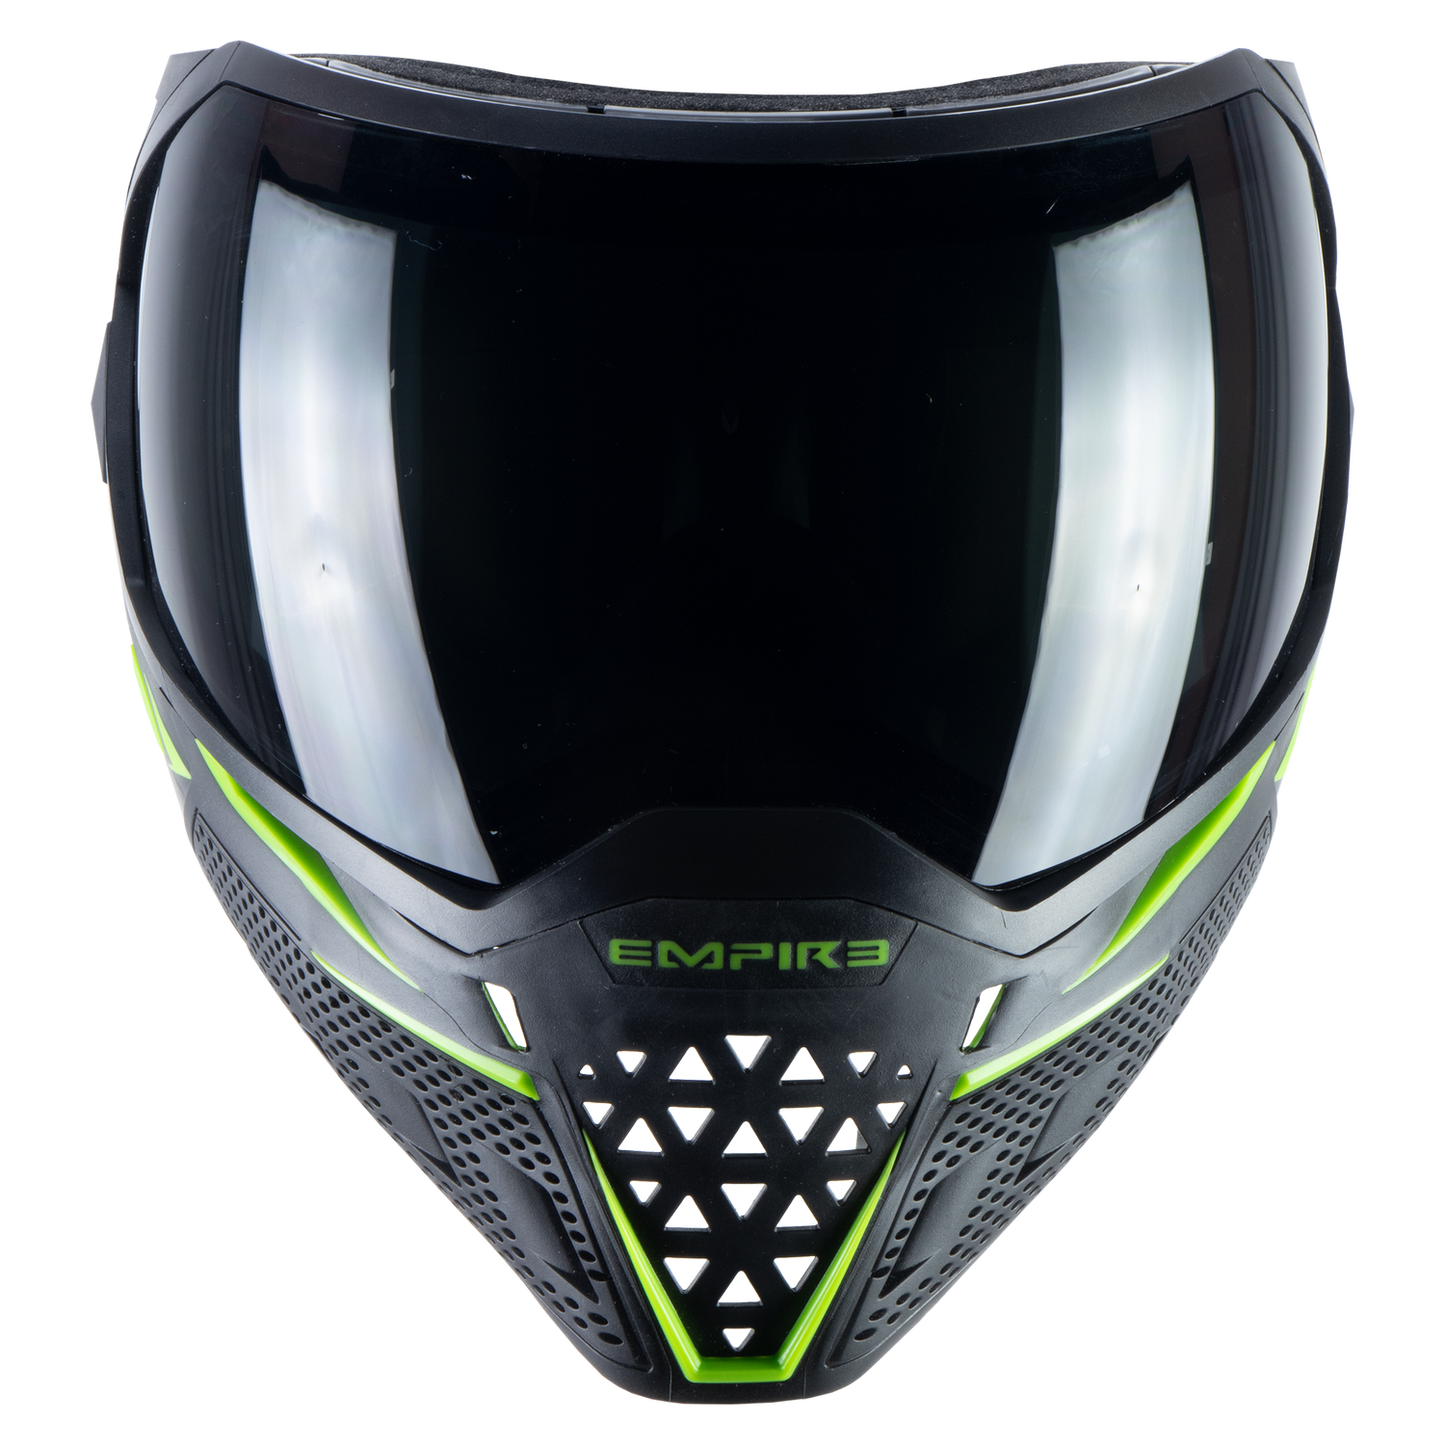 Empire EVS Goggle - Black/Lime Green - with 2 lenses [Thermal Ninja & Thermal Clear]